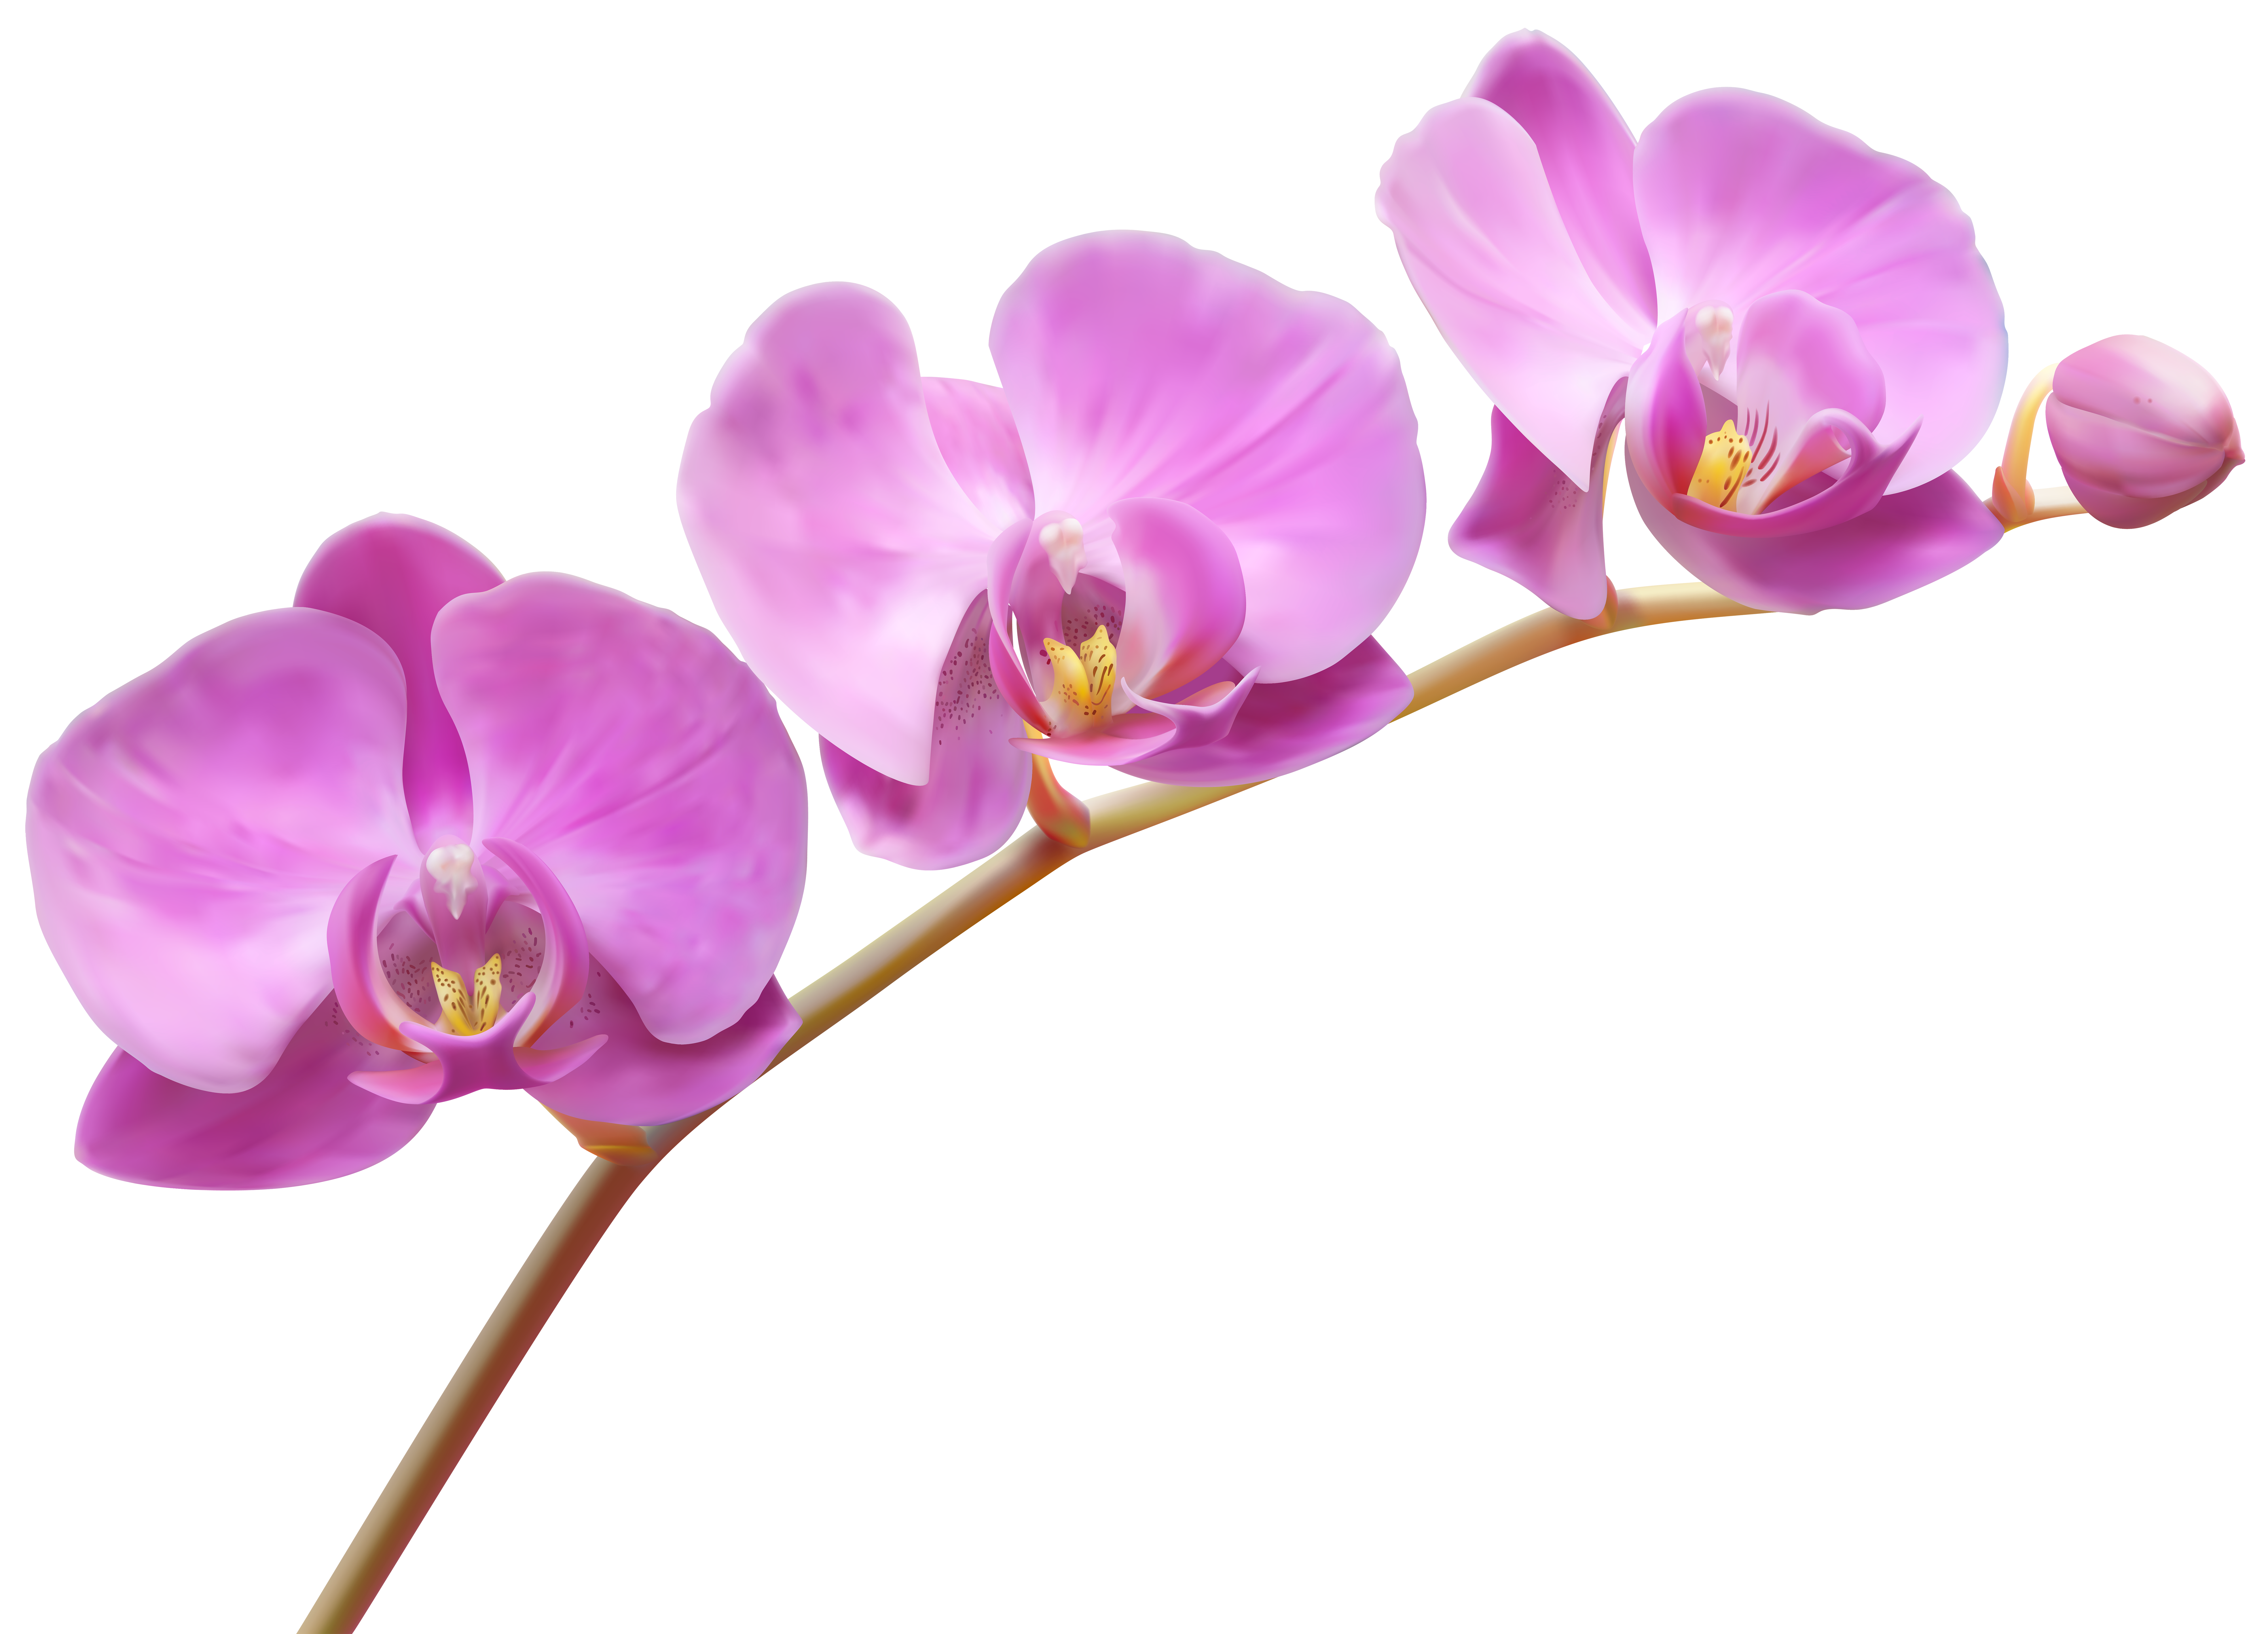 orchid clipart high re